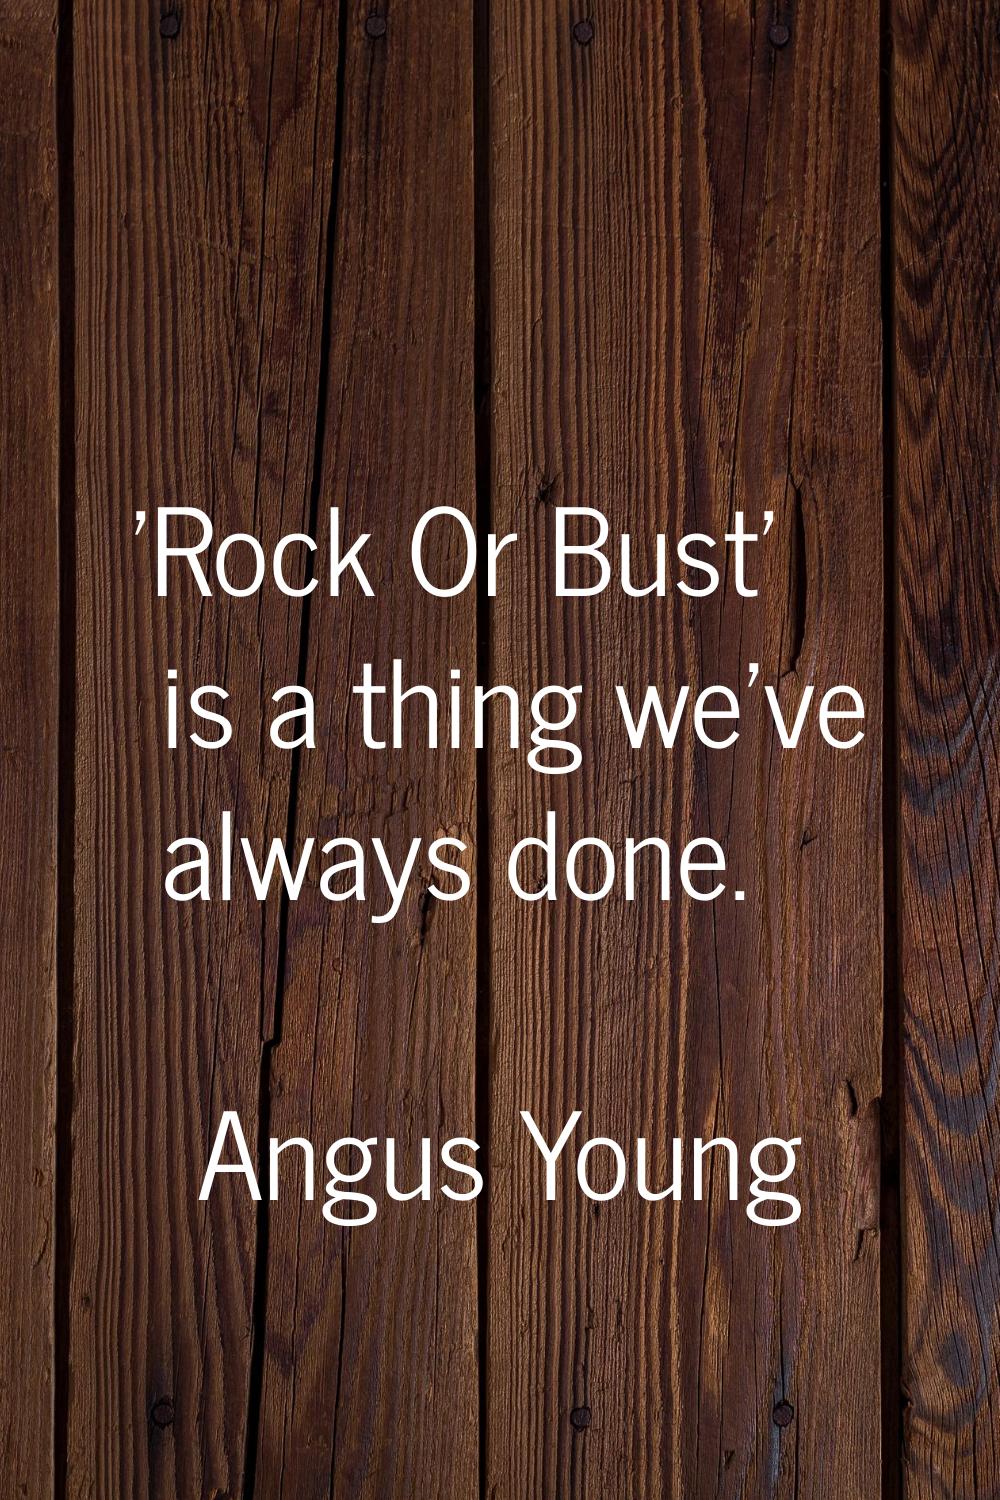 'Rock Or Bust' is a thing we've always done.